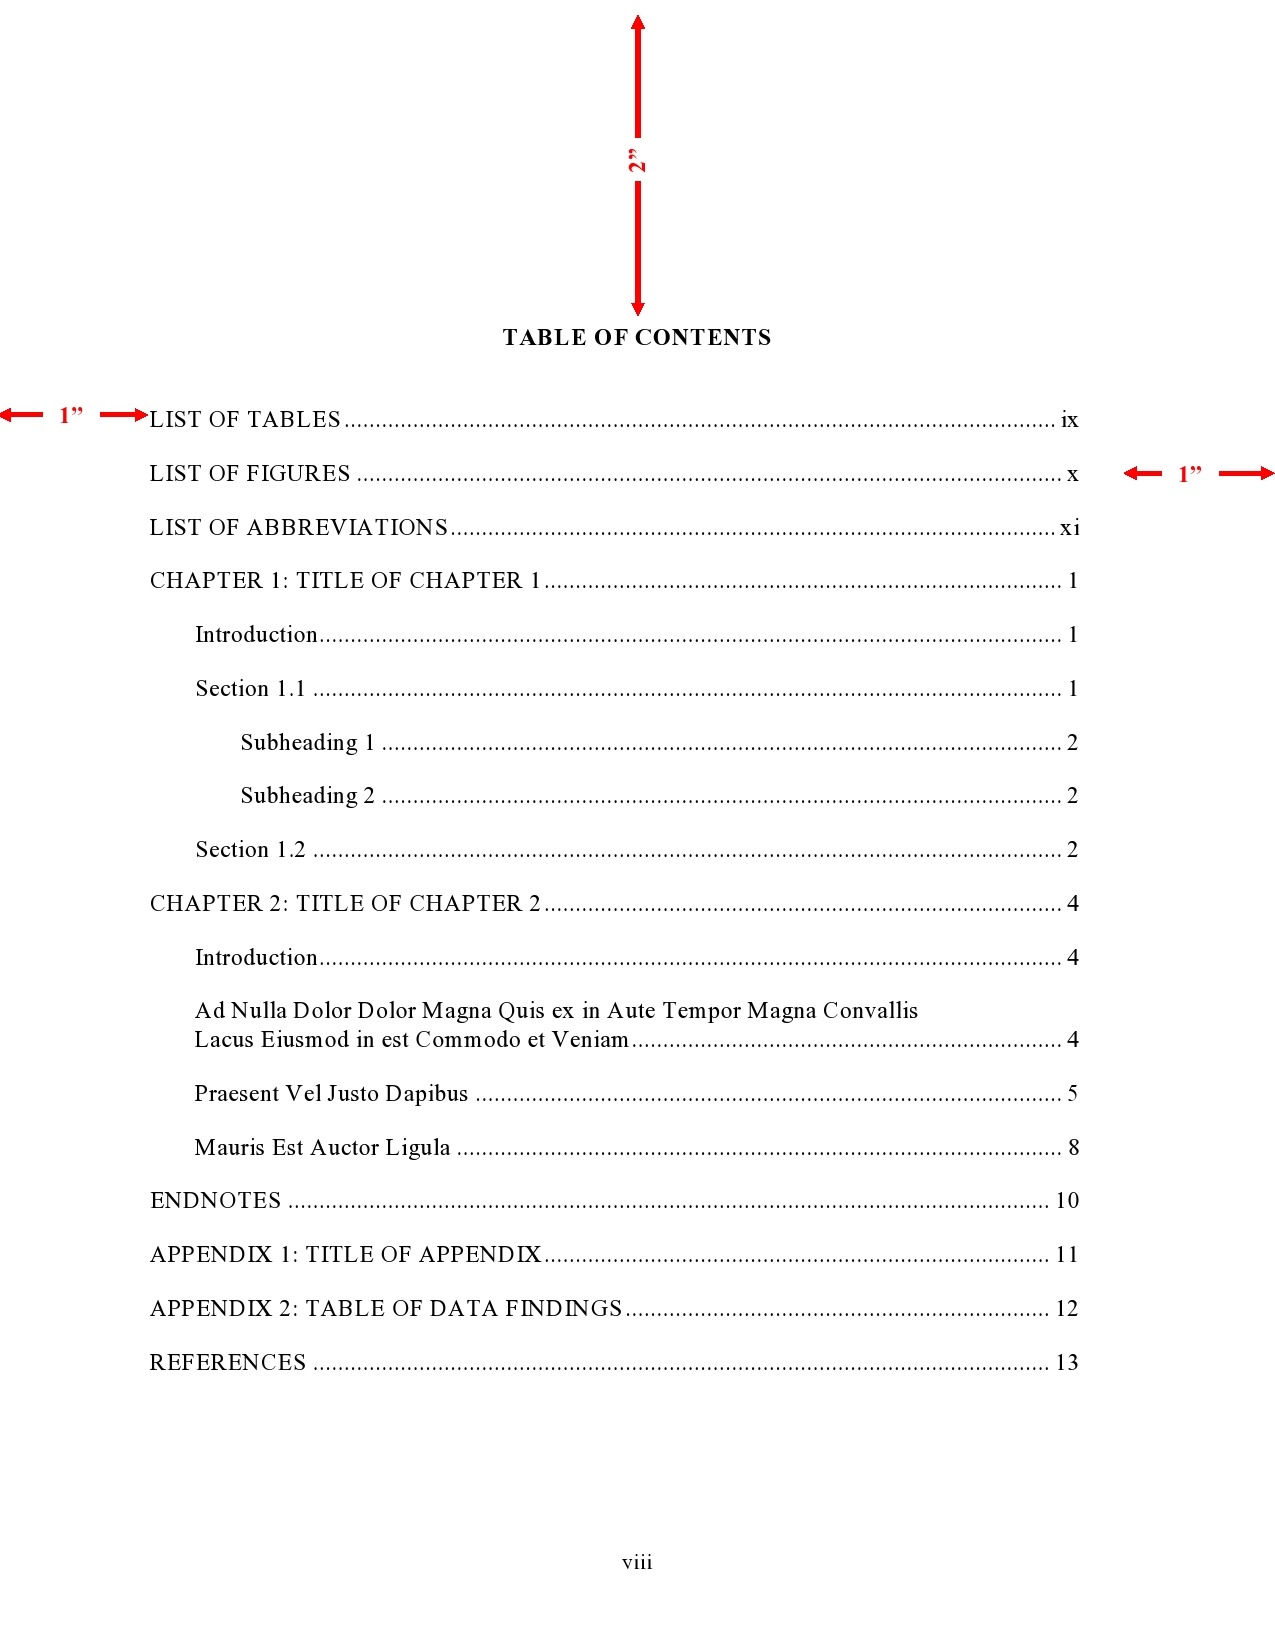 Contents page of dissertation